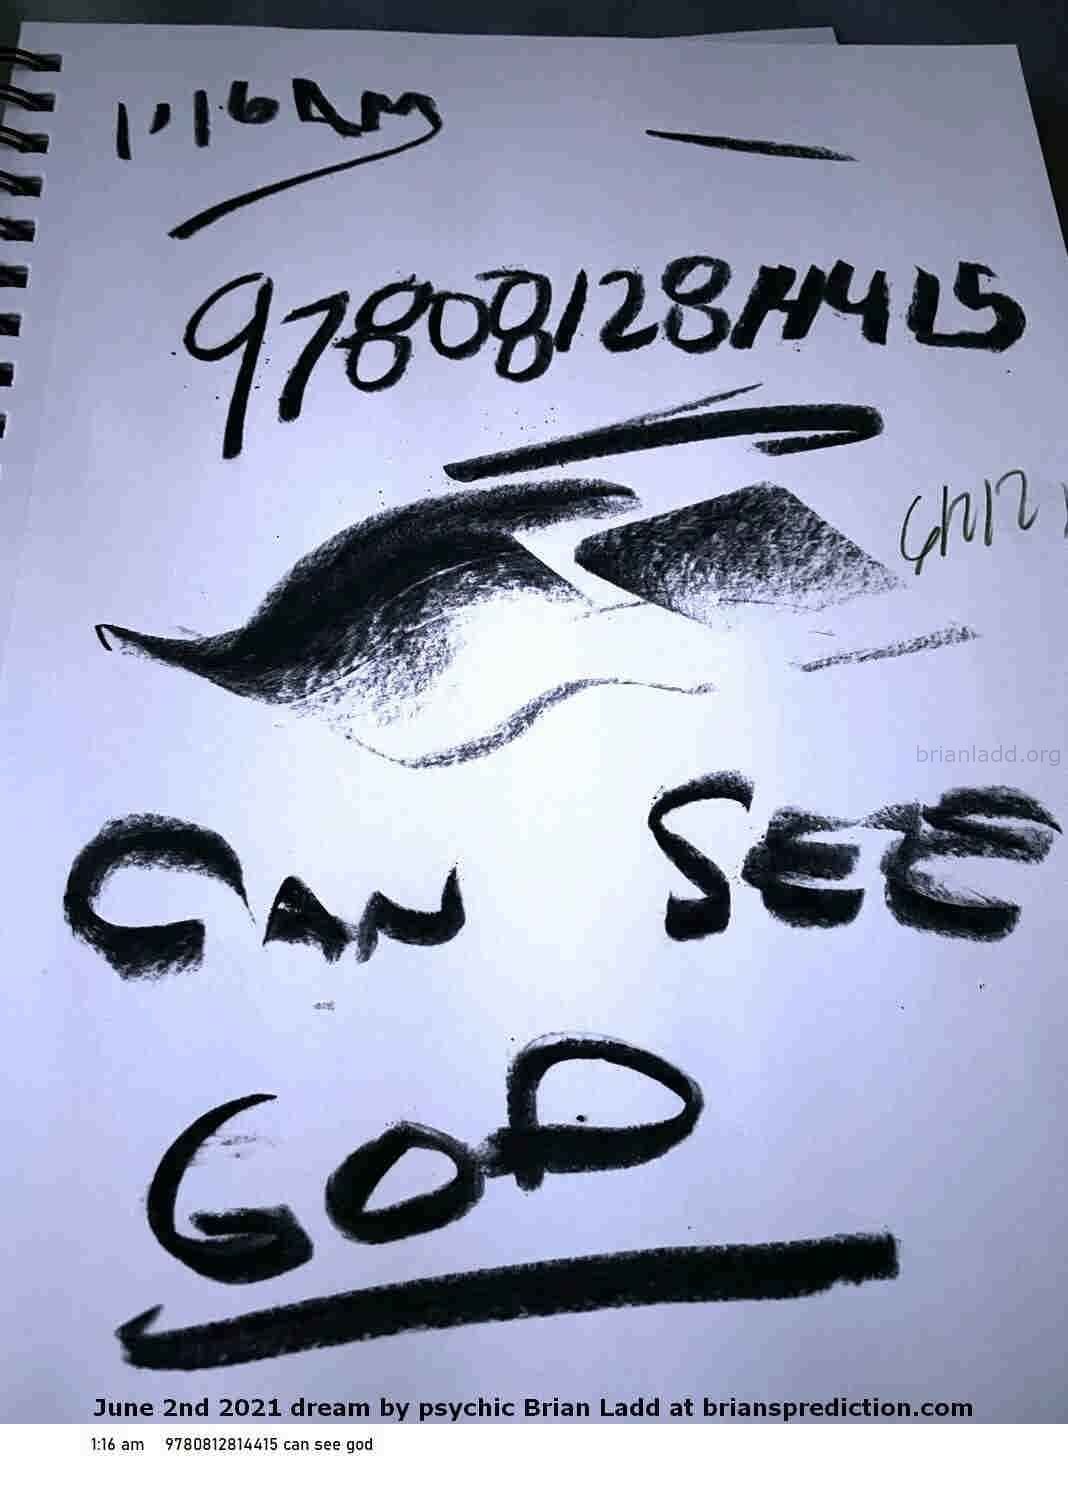 14960 2 June 2021 2 - 1:16 Am 9780812814415 Can See God....
1:16 Am 9780812814415 Can See God.
